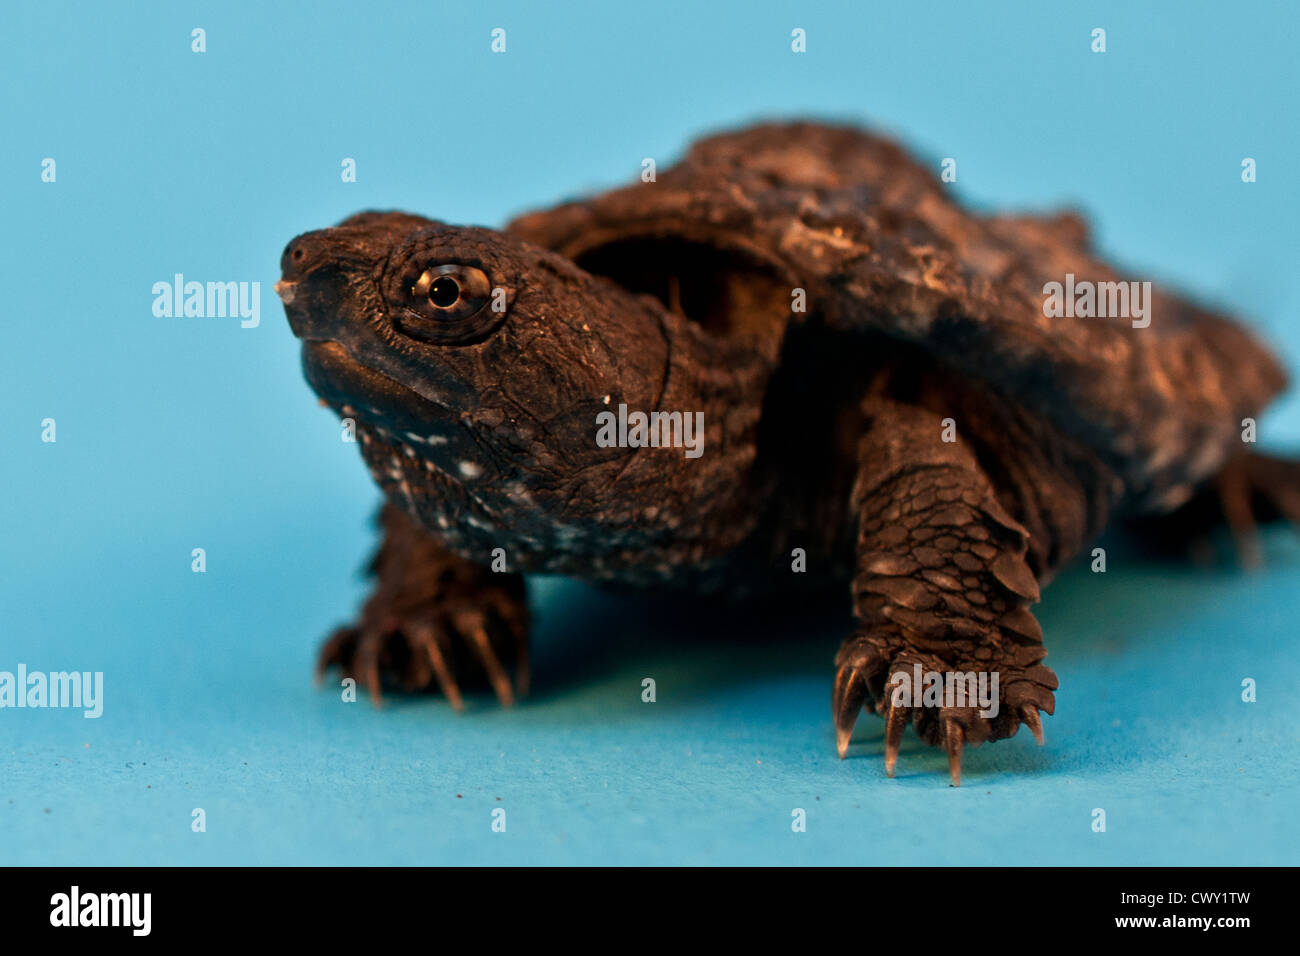 Hatchling Snapping Turtle (Chelydra serpentina) Stock Photo